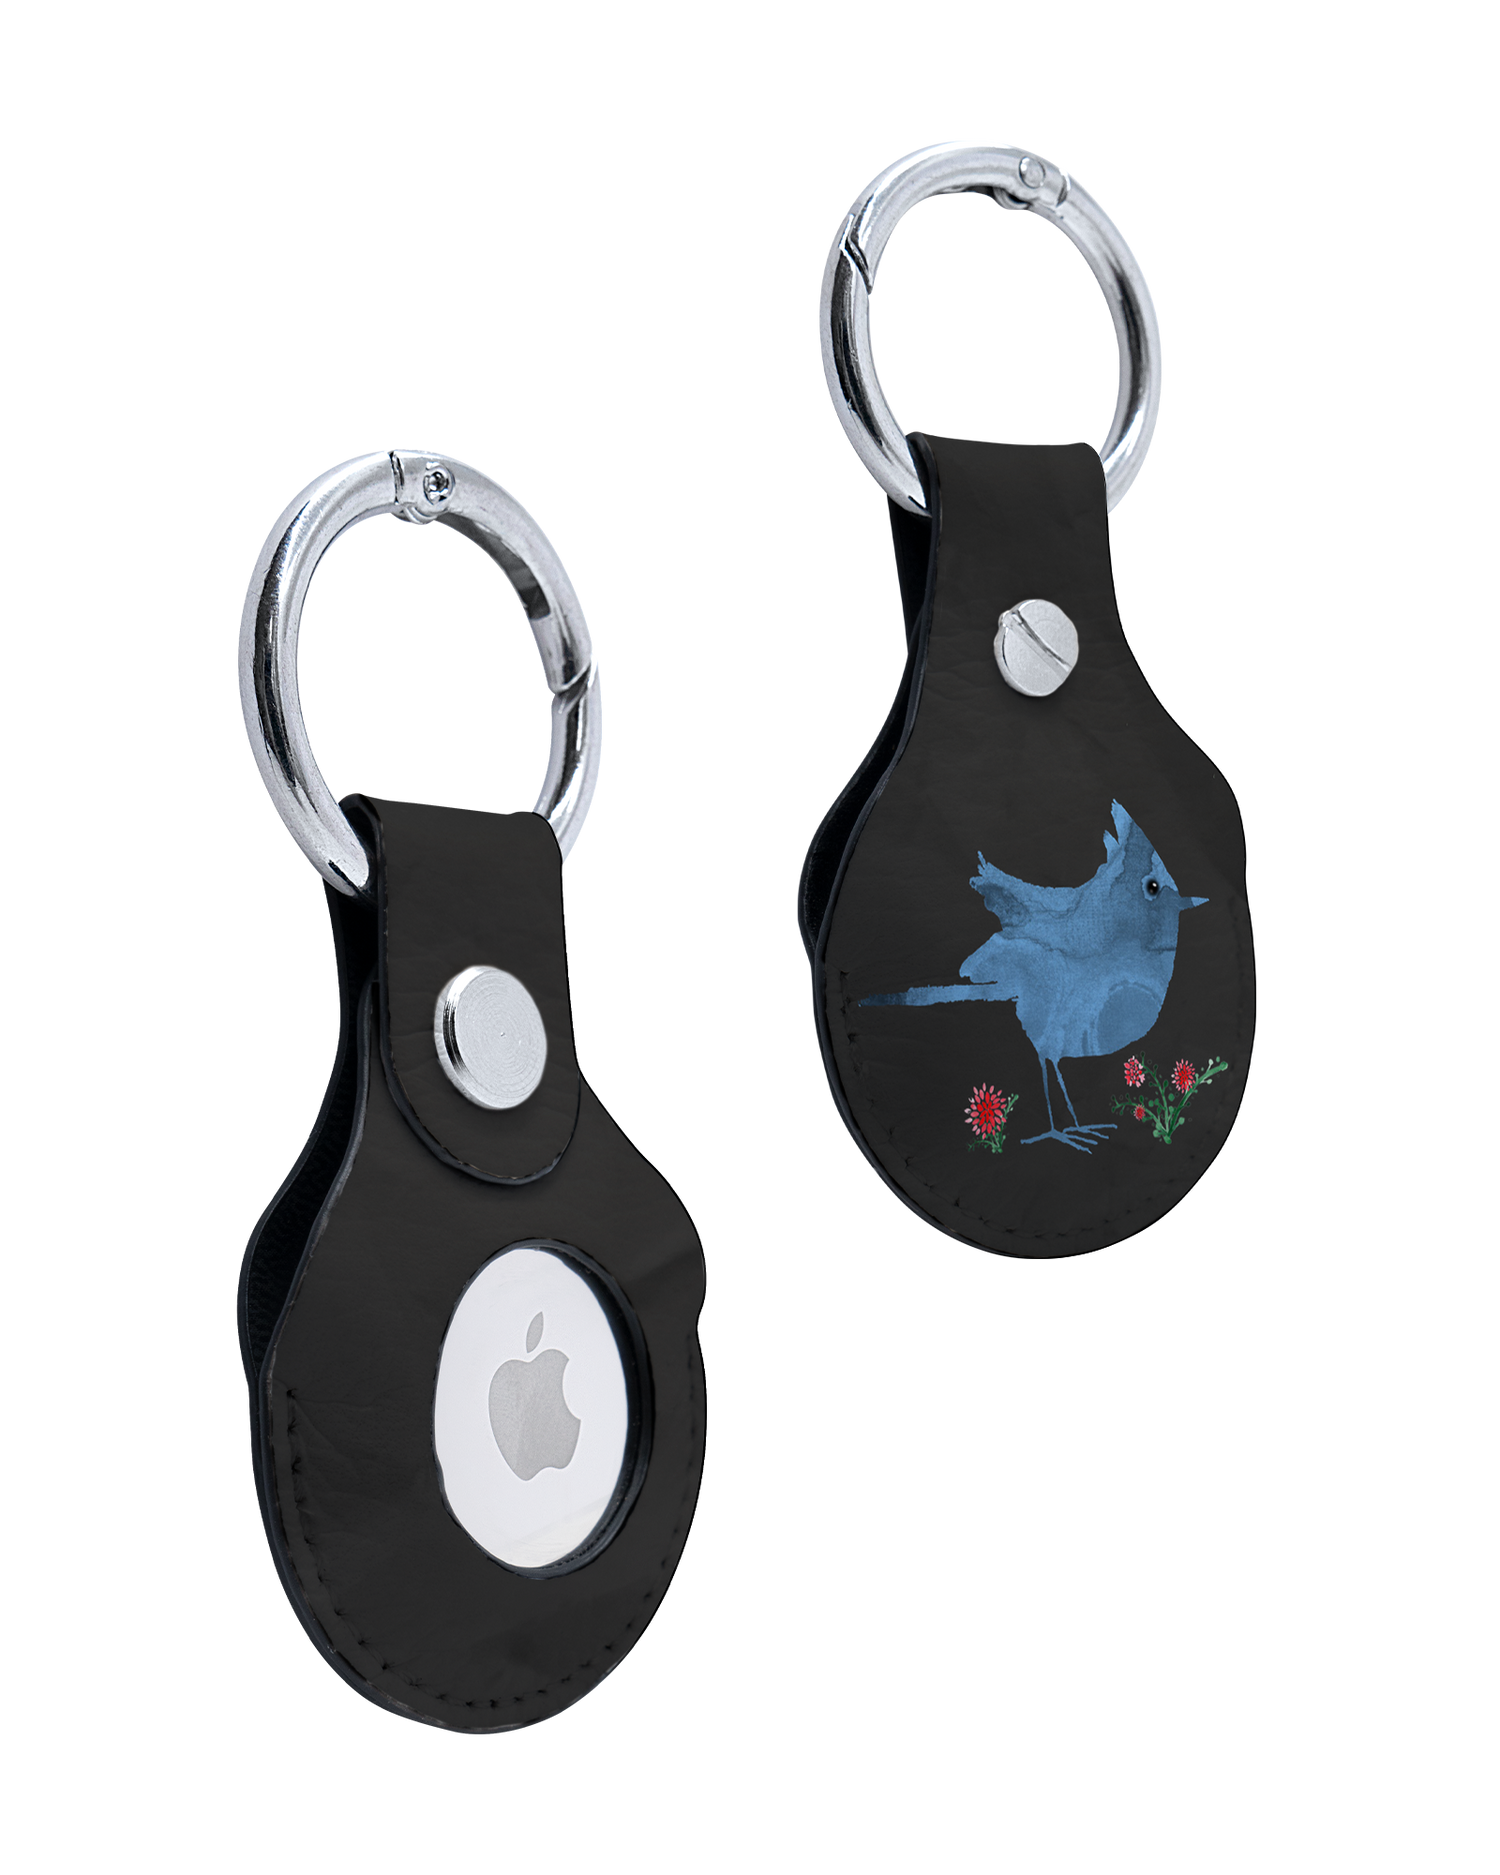 AirTag Holder with Watercolour Bird Black Design: Front and Back